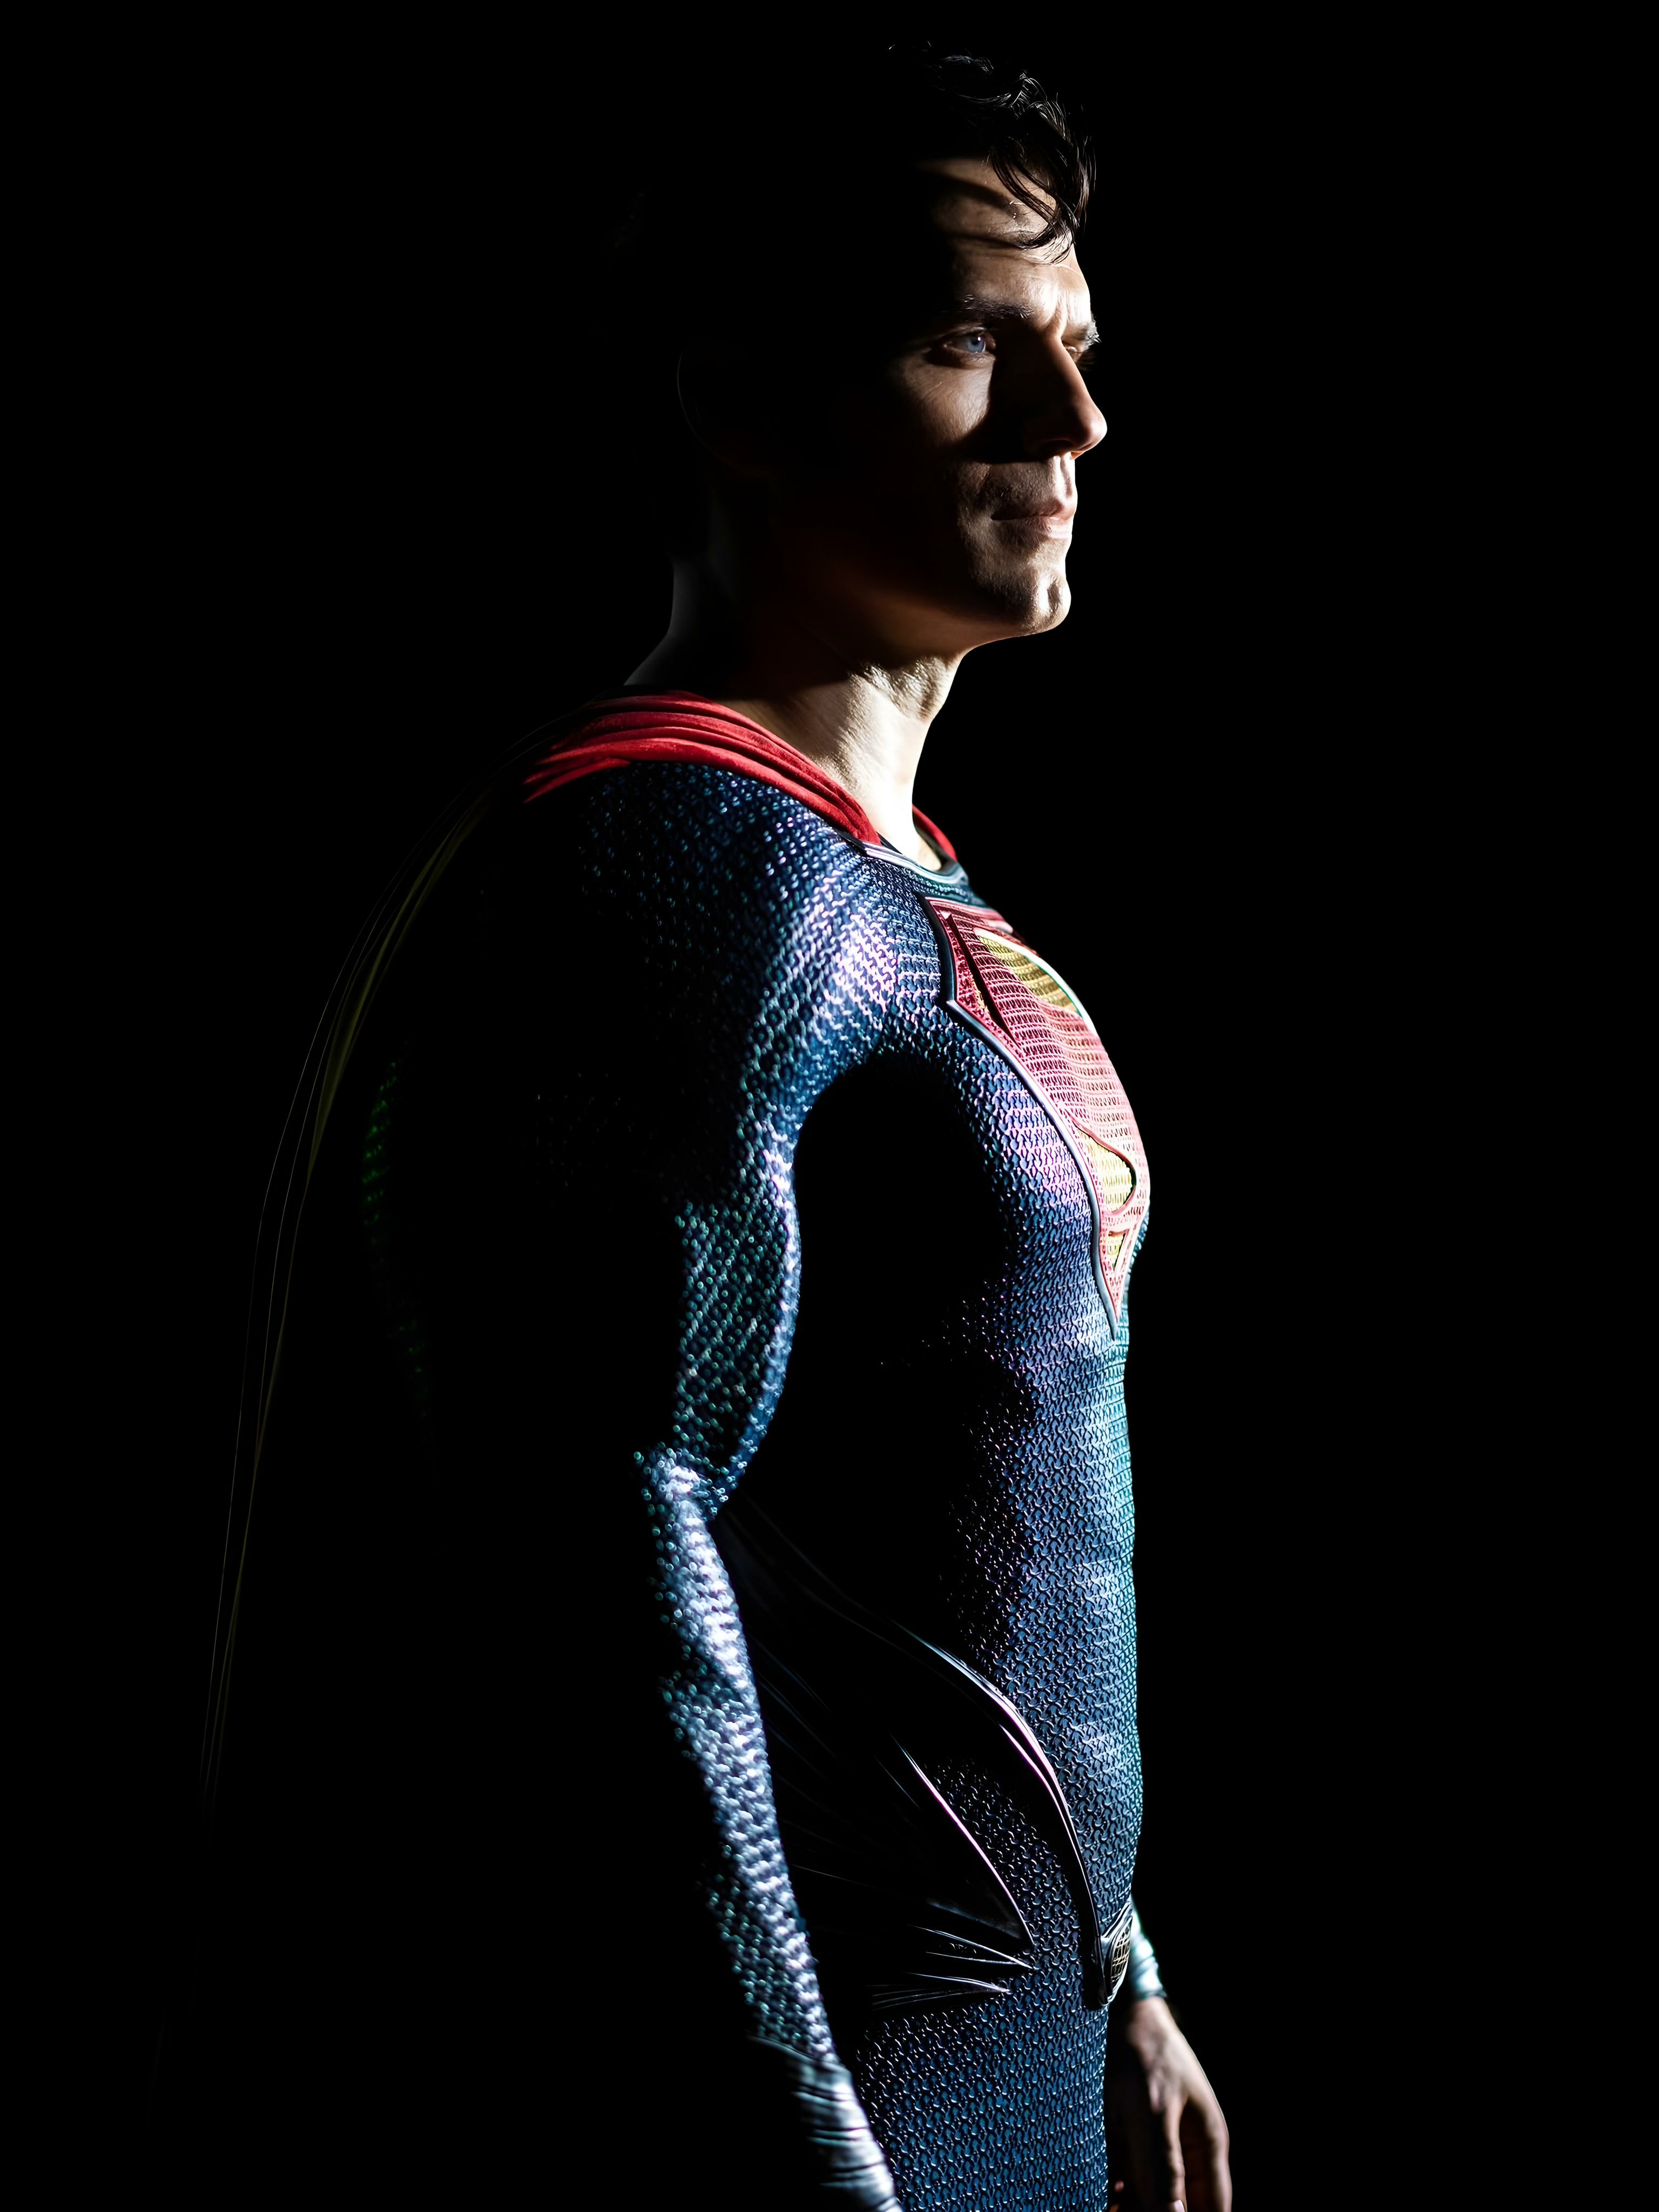 Henry Cavill Wallpapers, Pictures, Images